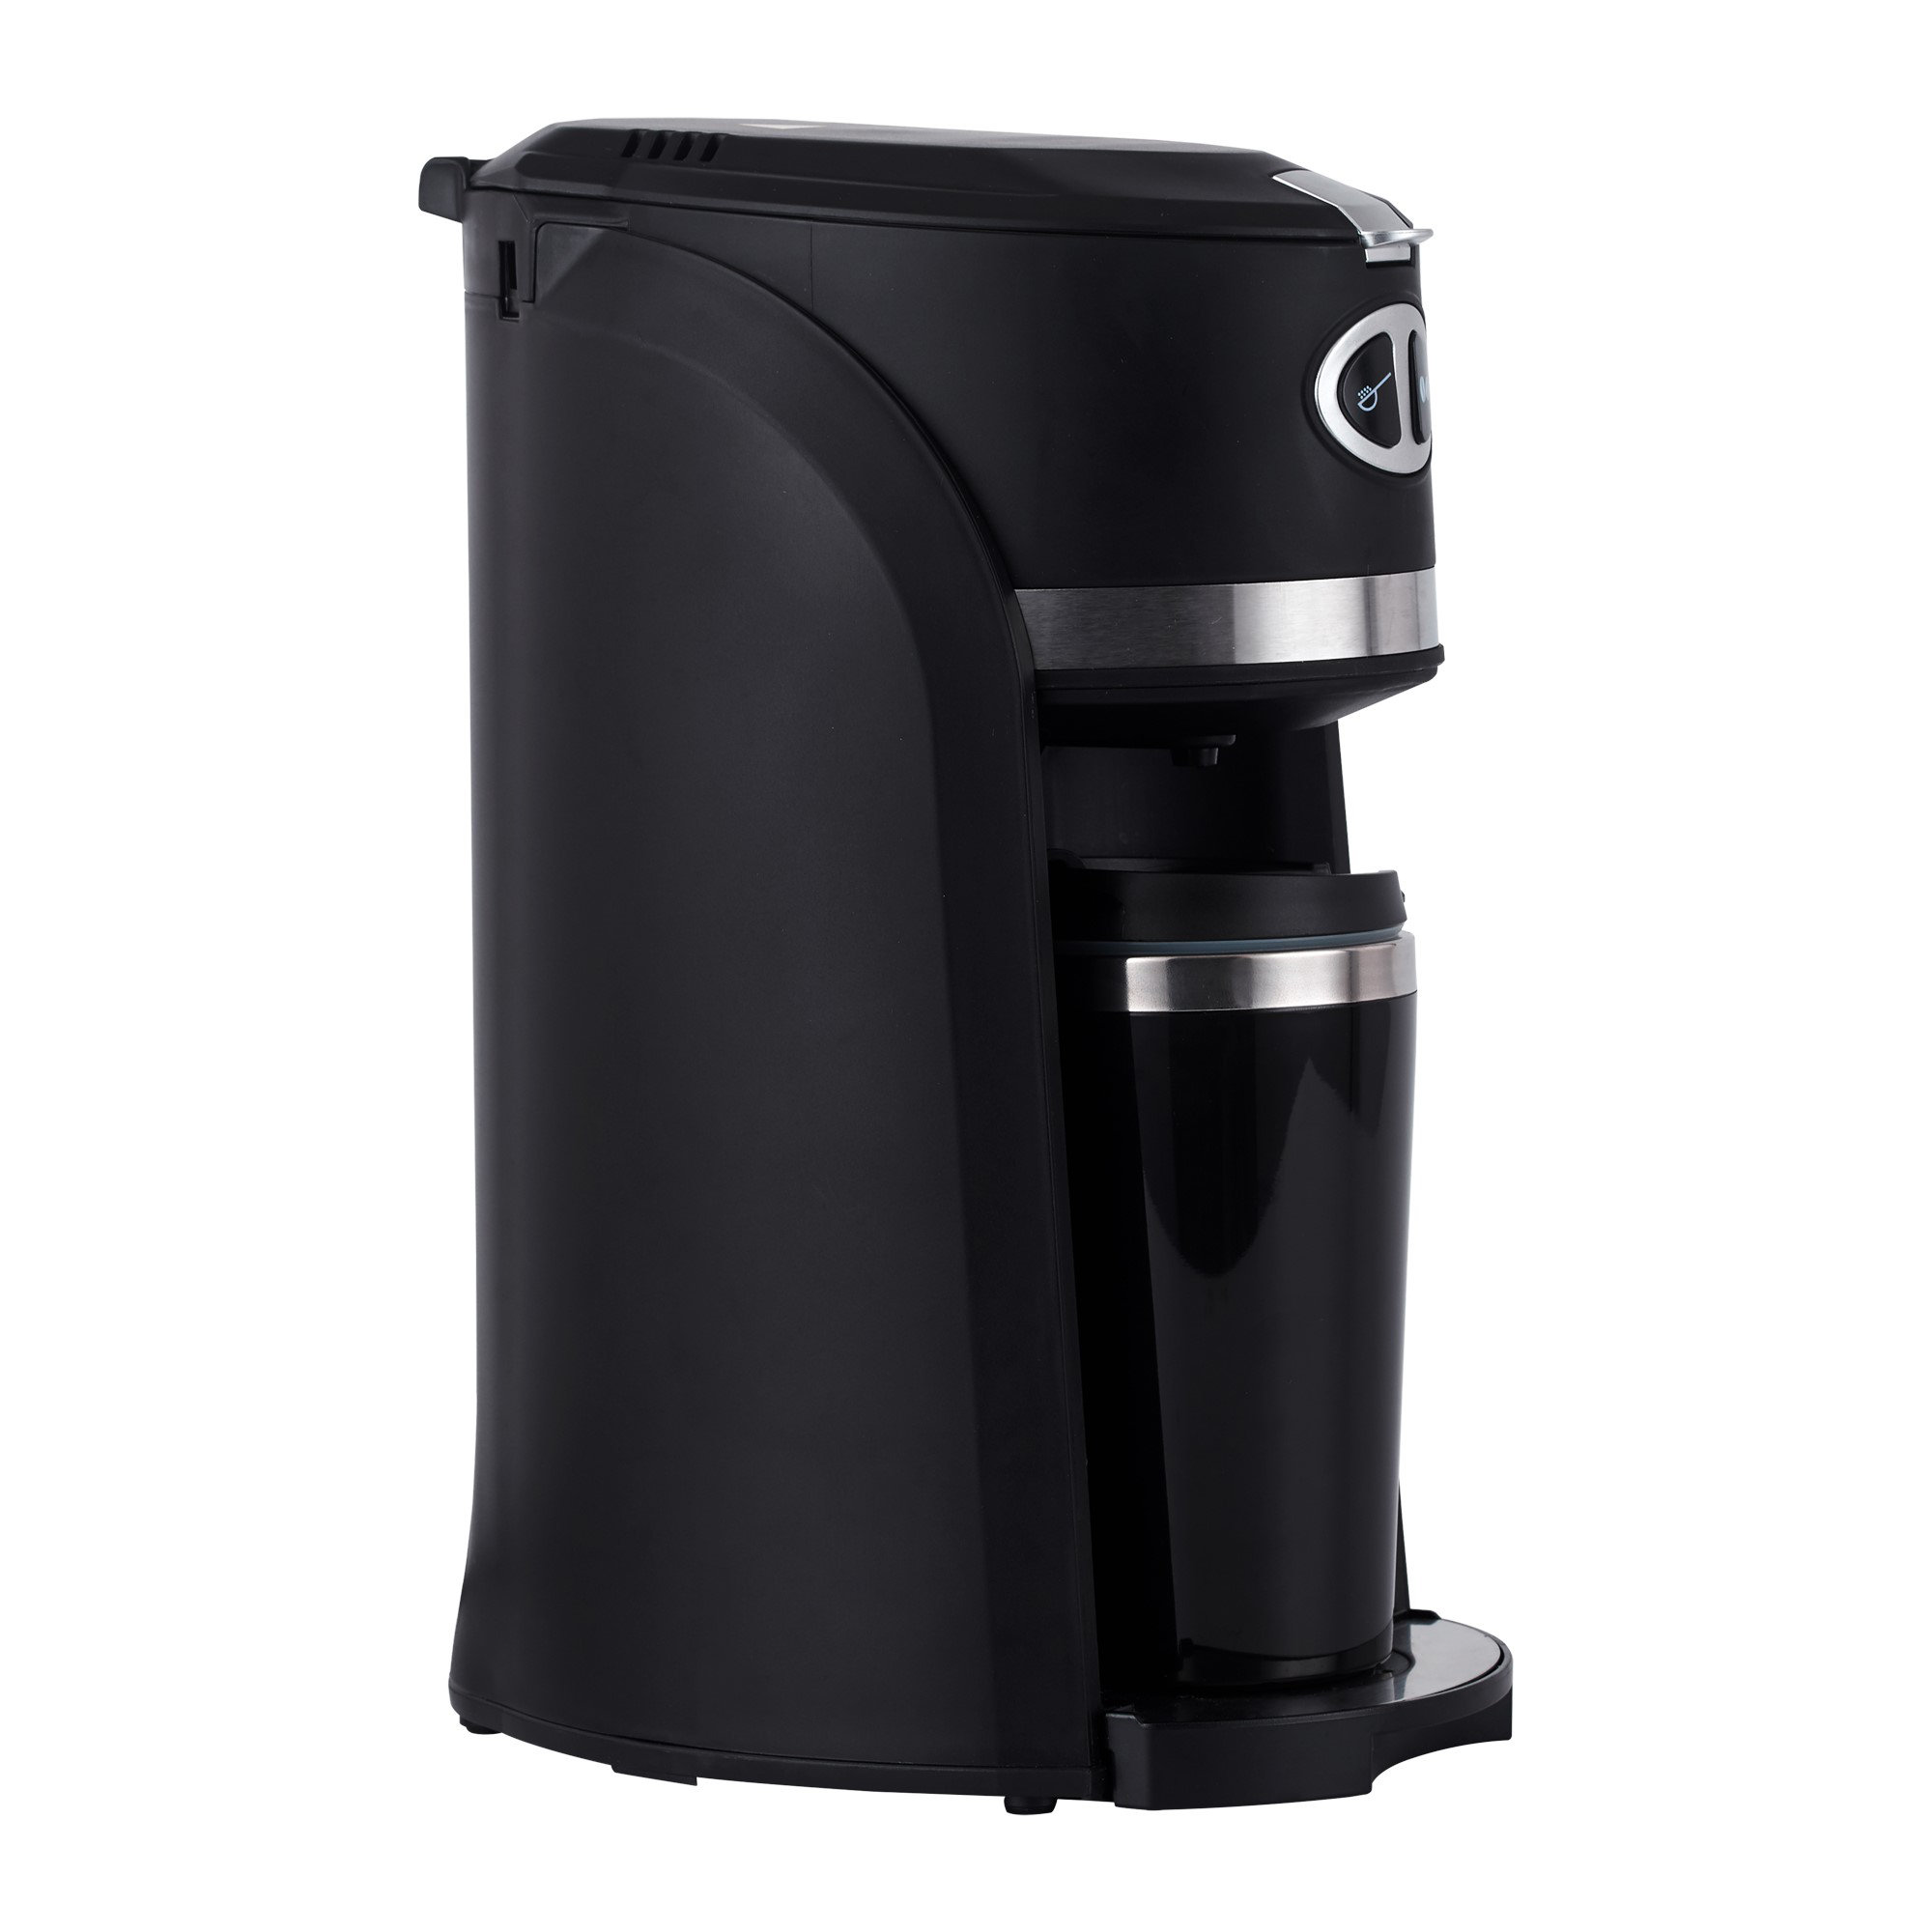 2 in 1 Single Grind & Brew Automatic Personal Coffee Maker